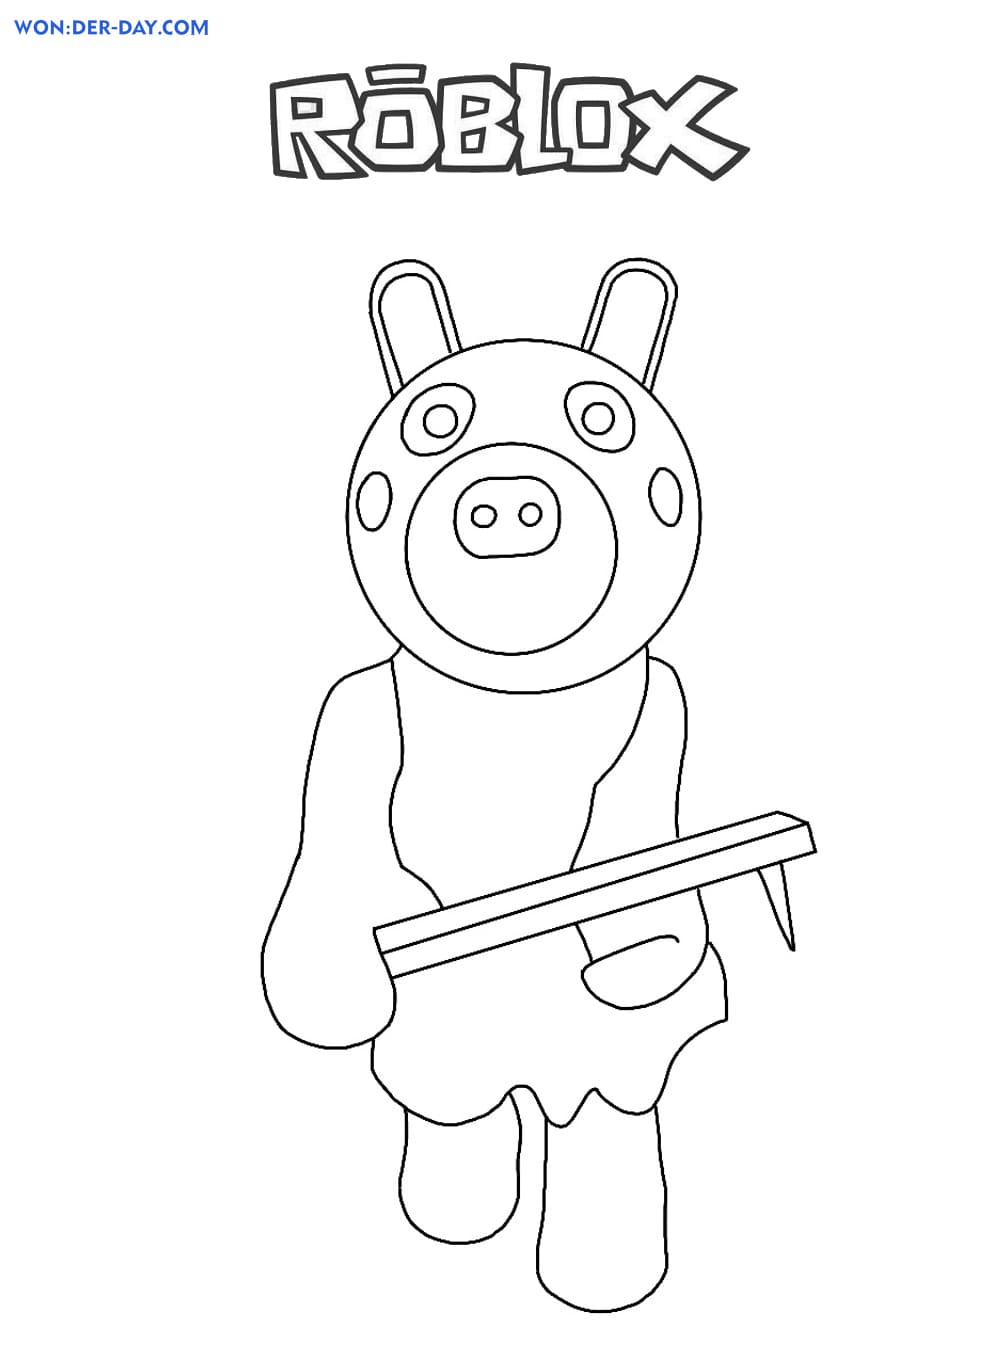 Piggy Roblox Coloring Pages Wonder Day Coloring Pages For Children And Adults - piggy roblox coloring pictures